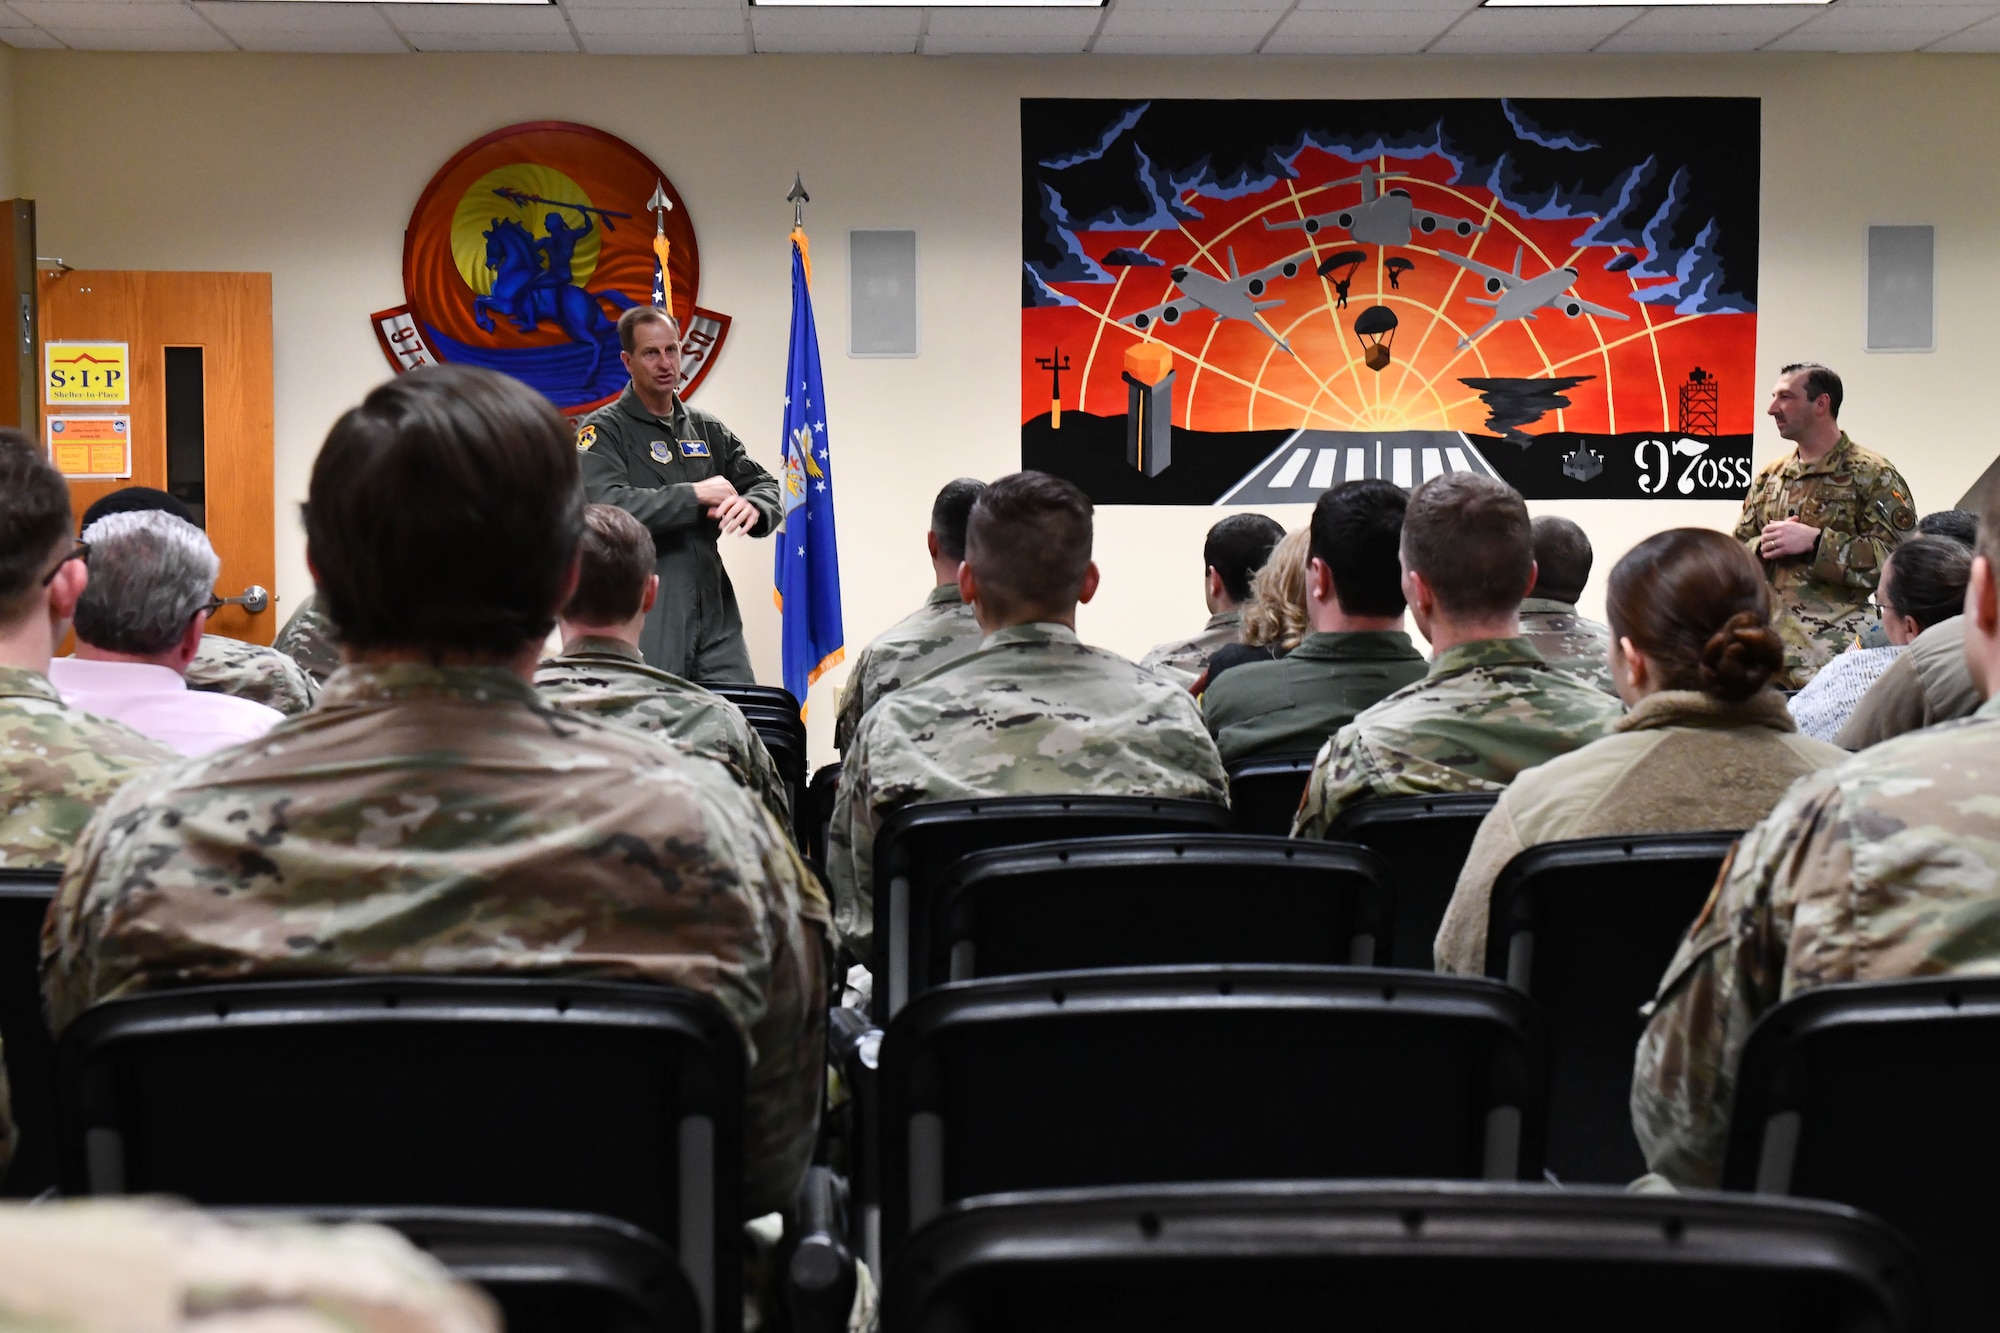 U.S. Air Force Maj. Gen. Corey J. Martin, 18th Air Force commander, speaks to members of the 97th Operation Support Squadron (OSS) at Altus Air Force Base, Oklahoma, Jan. 26, 2023. The 97th OSS provides direct support to two flying squadrons and operates six flights including airfield operations, current operations, aircrew flight equipment, intelligence, tactics and weather. (U.S. Air Force photo by Airman 1st Class Miyah Gray)